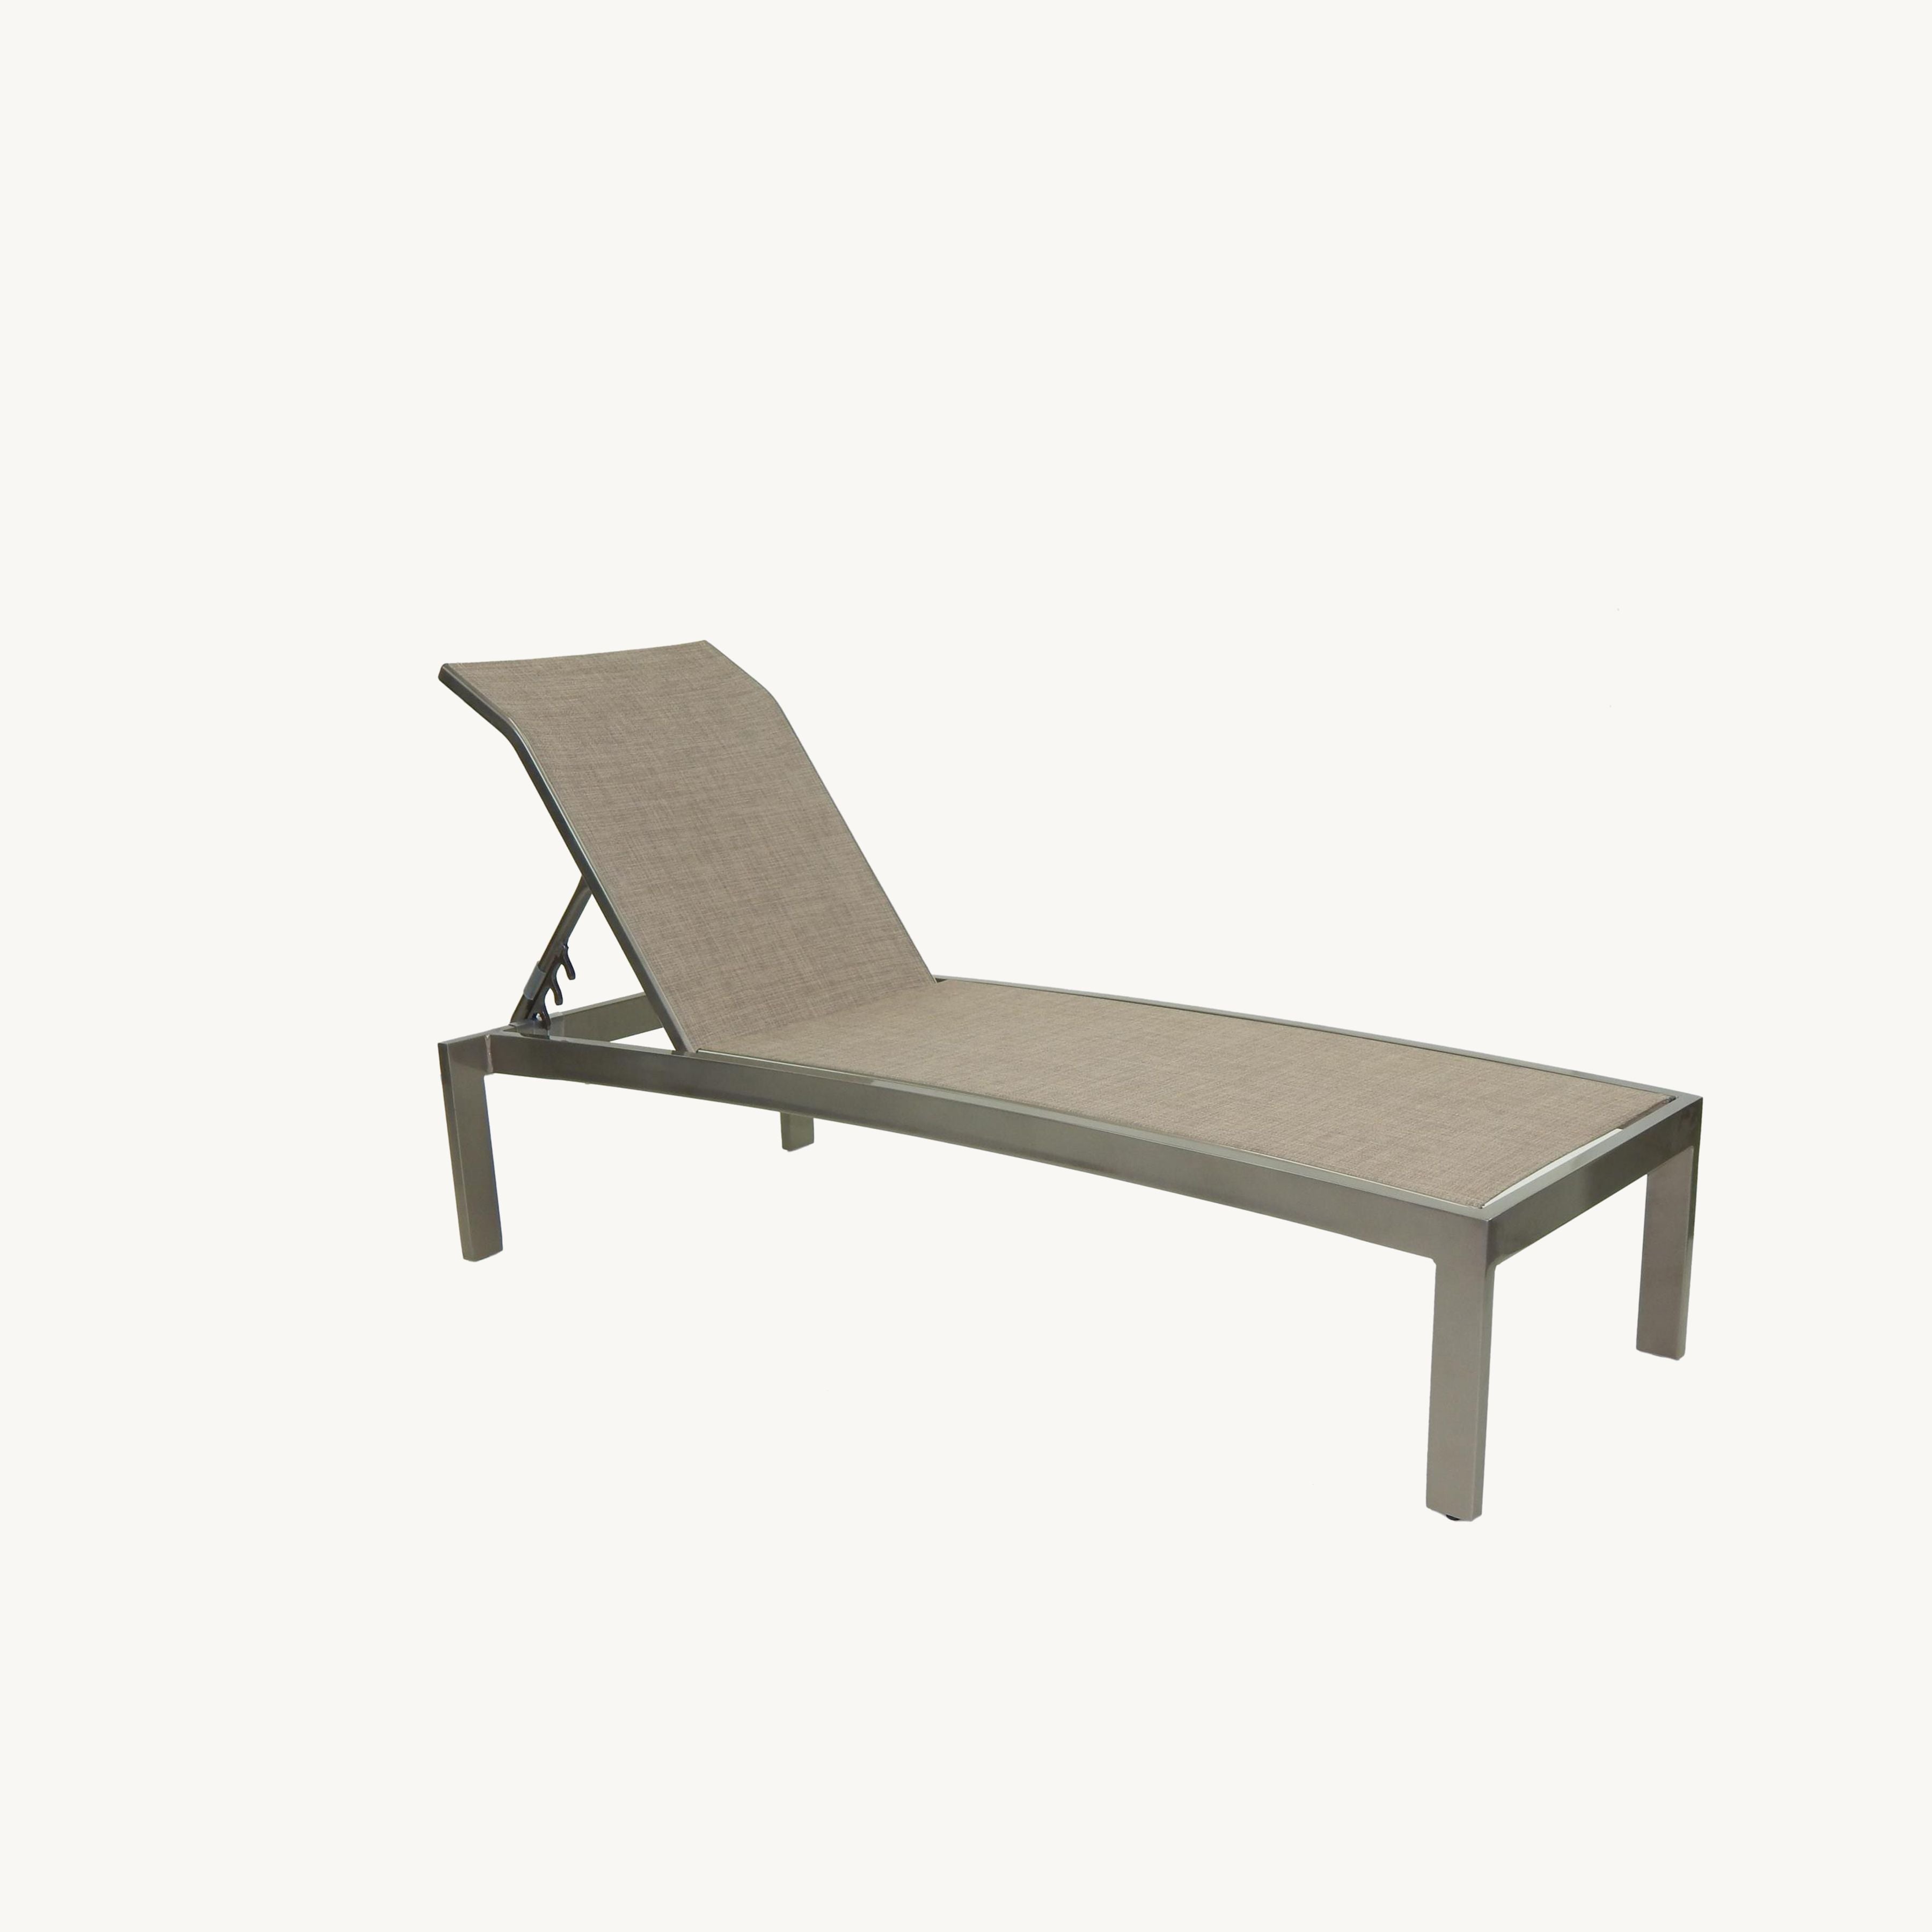 Orion Adjustable Sling Chaise Lounge By Castelle